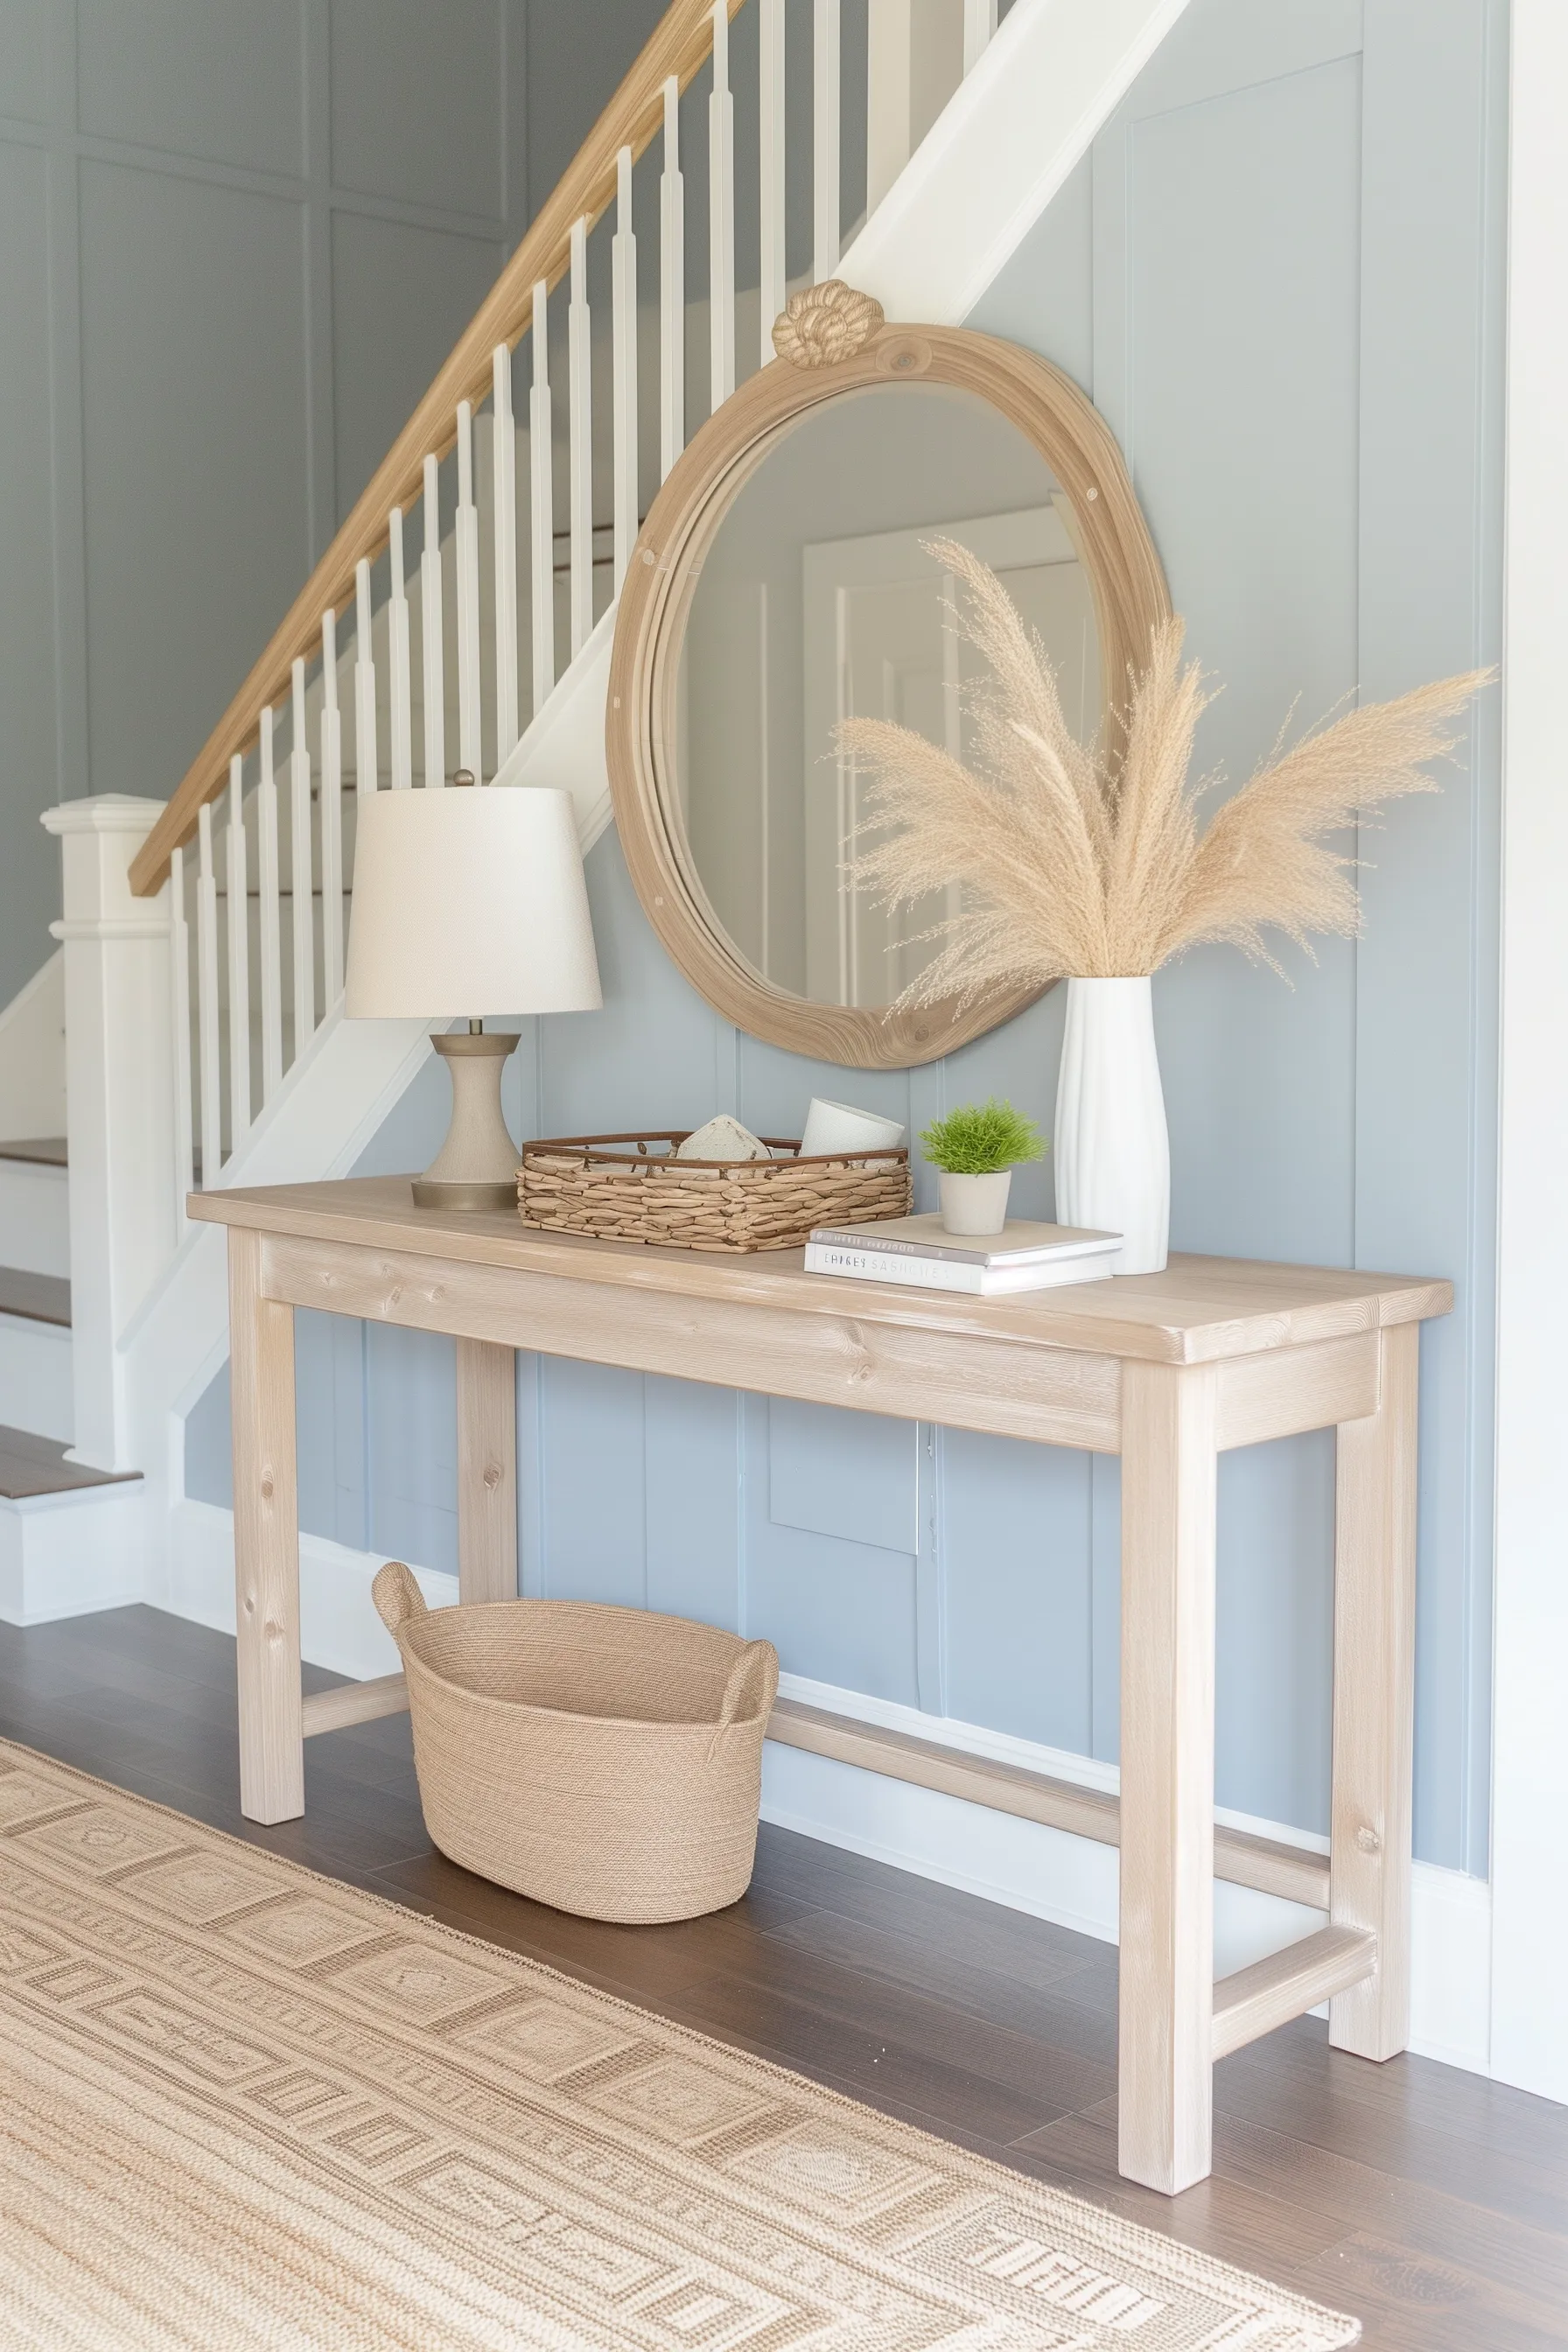 A blue and white entry with pampas grass, a circular mirror and rattan furniture.